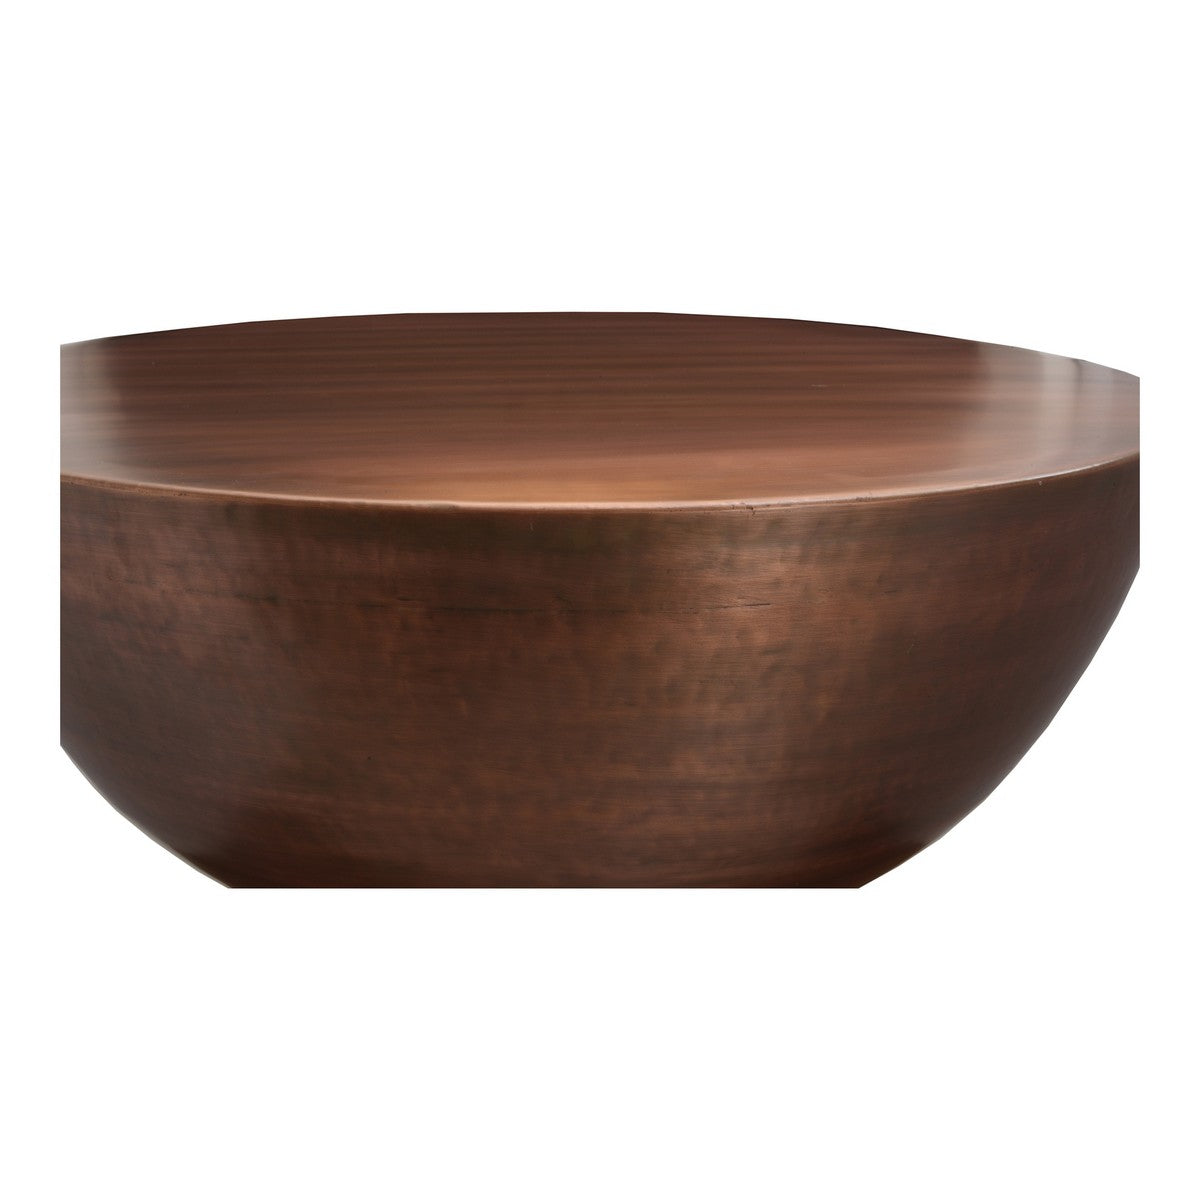 Moe's Home Collection Conga Coffee Table Copper - OT-1002-42